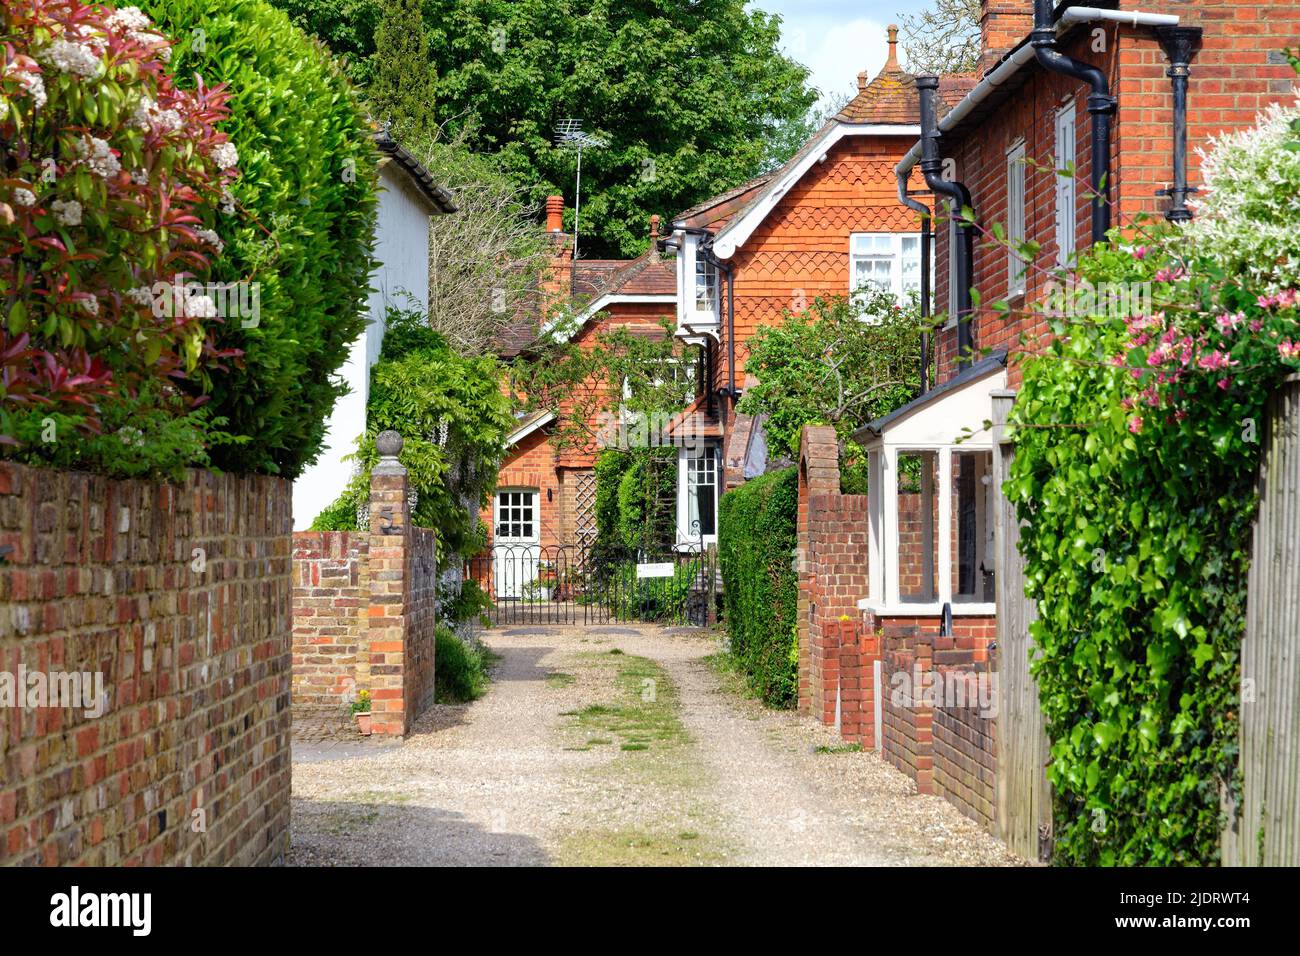 Secluded attractive old fashioned red tiled cottages in Herrings Lane Chertsey Surrey England UK Stock Photo